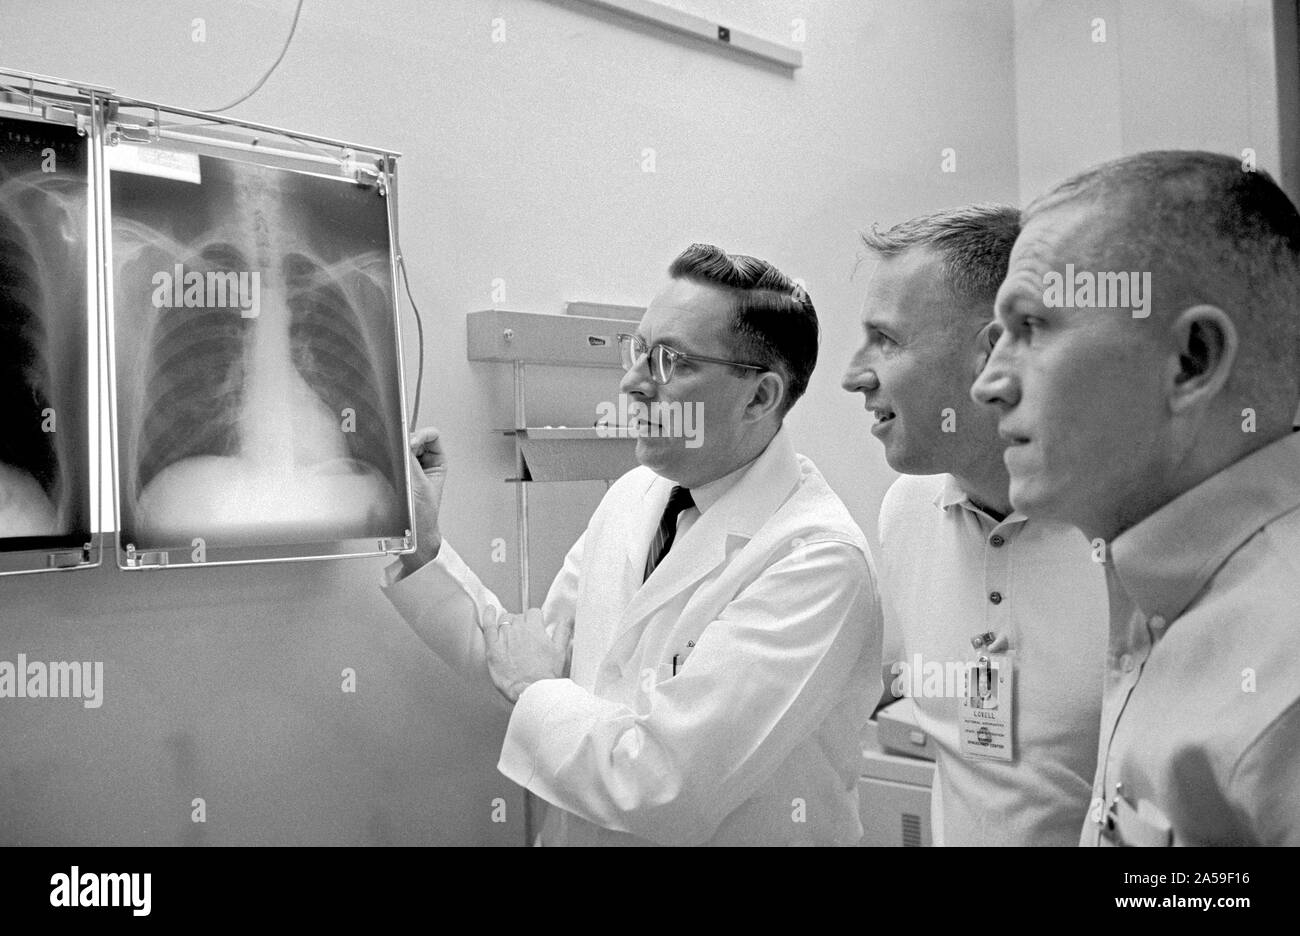 (2 Dec. 1965) --- Dr. Charles A. Berry (left), chief of the Manned Spacecraft Center (MSC) Medical Programs, and astronauts James A. Lovell Jr. (center), Gemini-7 pilot, and Frank Borman, Gemini-7 command pilot, examine a series of chest x-rays taken during the preflight physical. Stock Photo